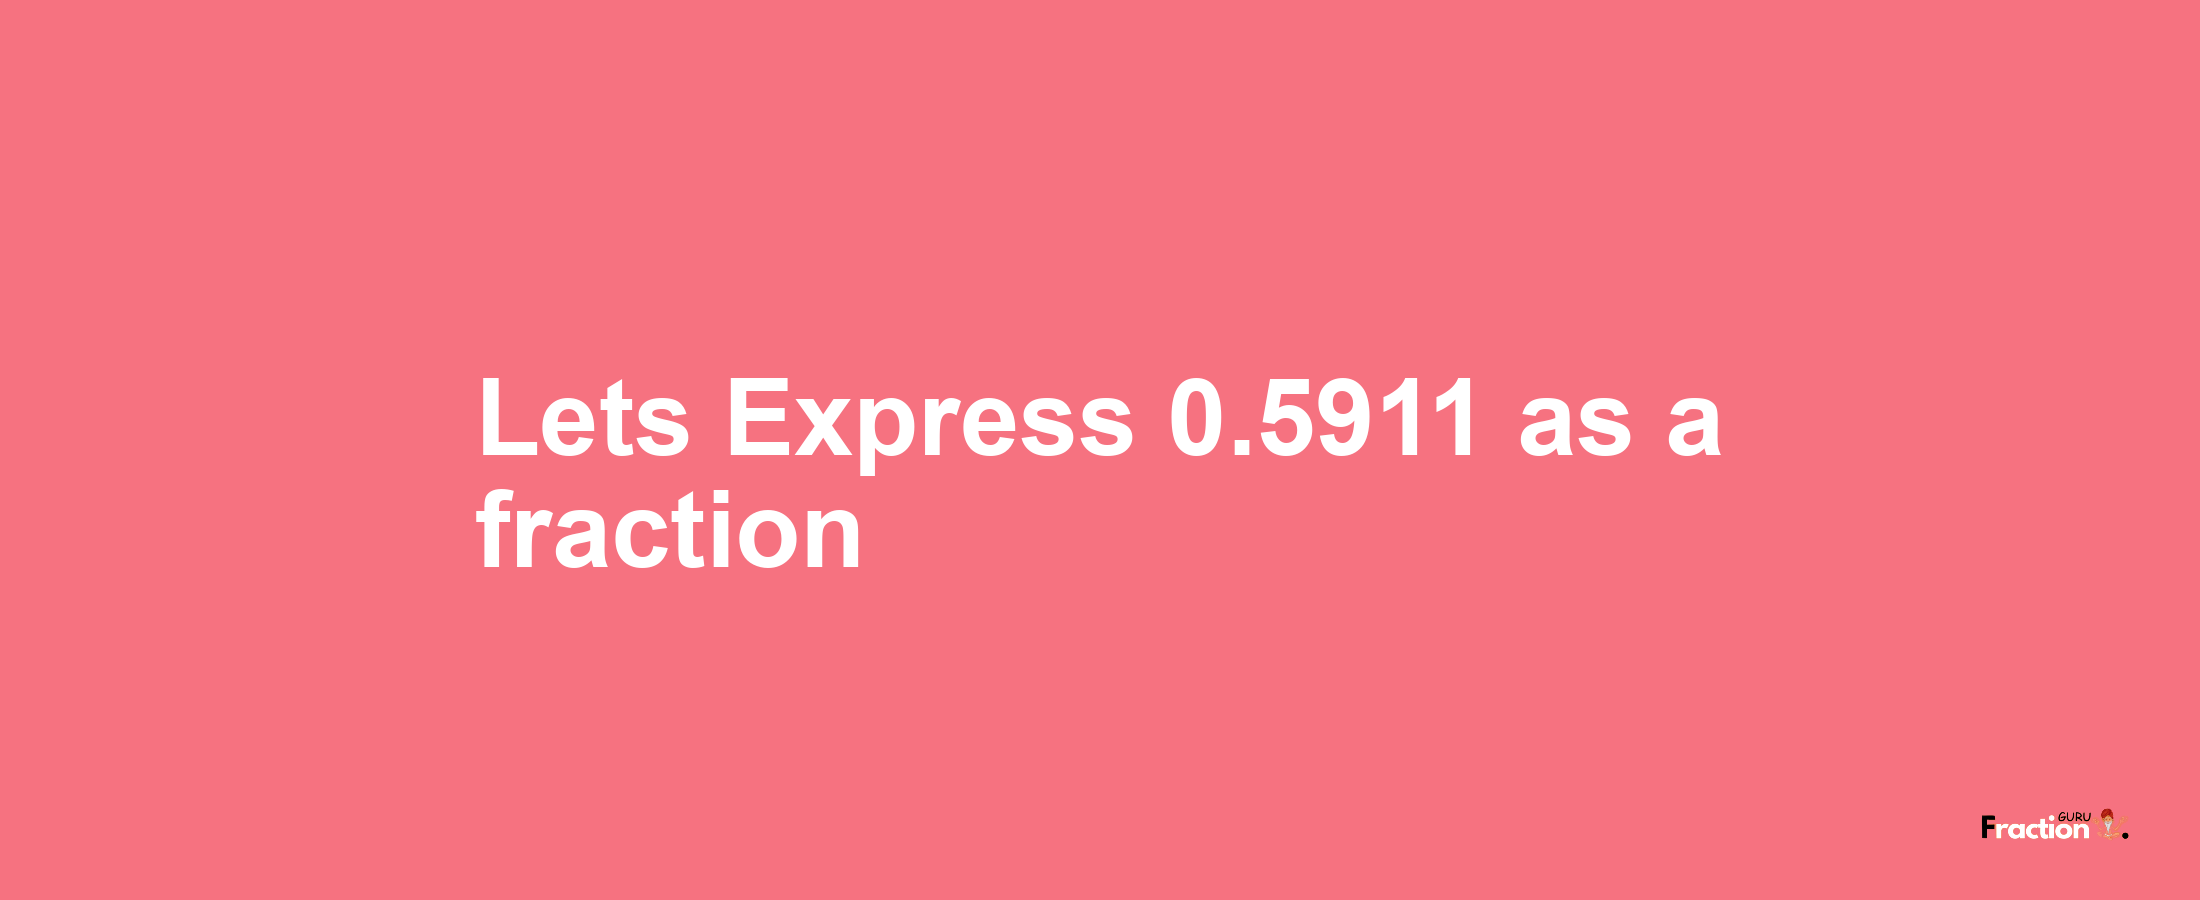 Lets Express 0.5911 as afraction